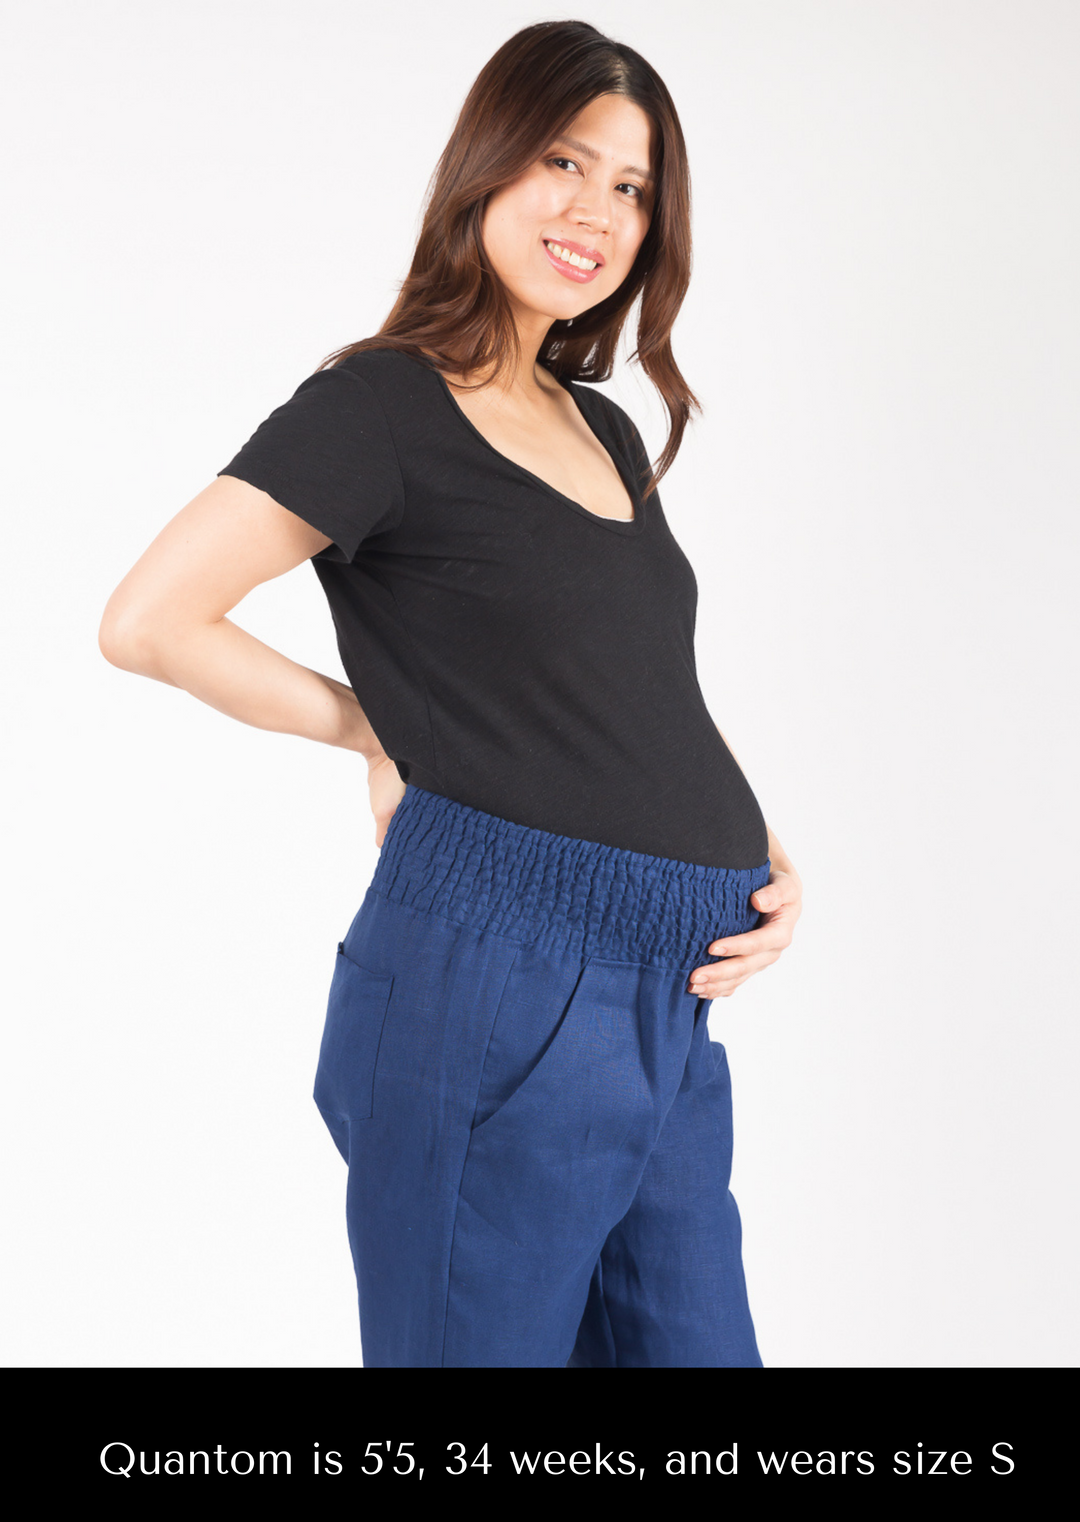 Why Don't Maternity Pants Have Front Pockets?